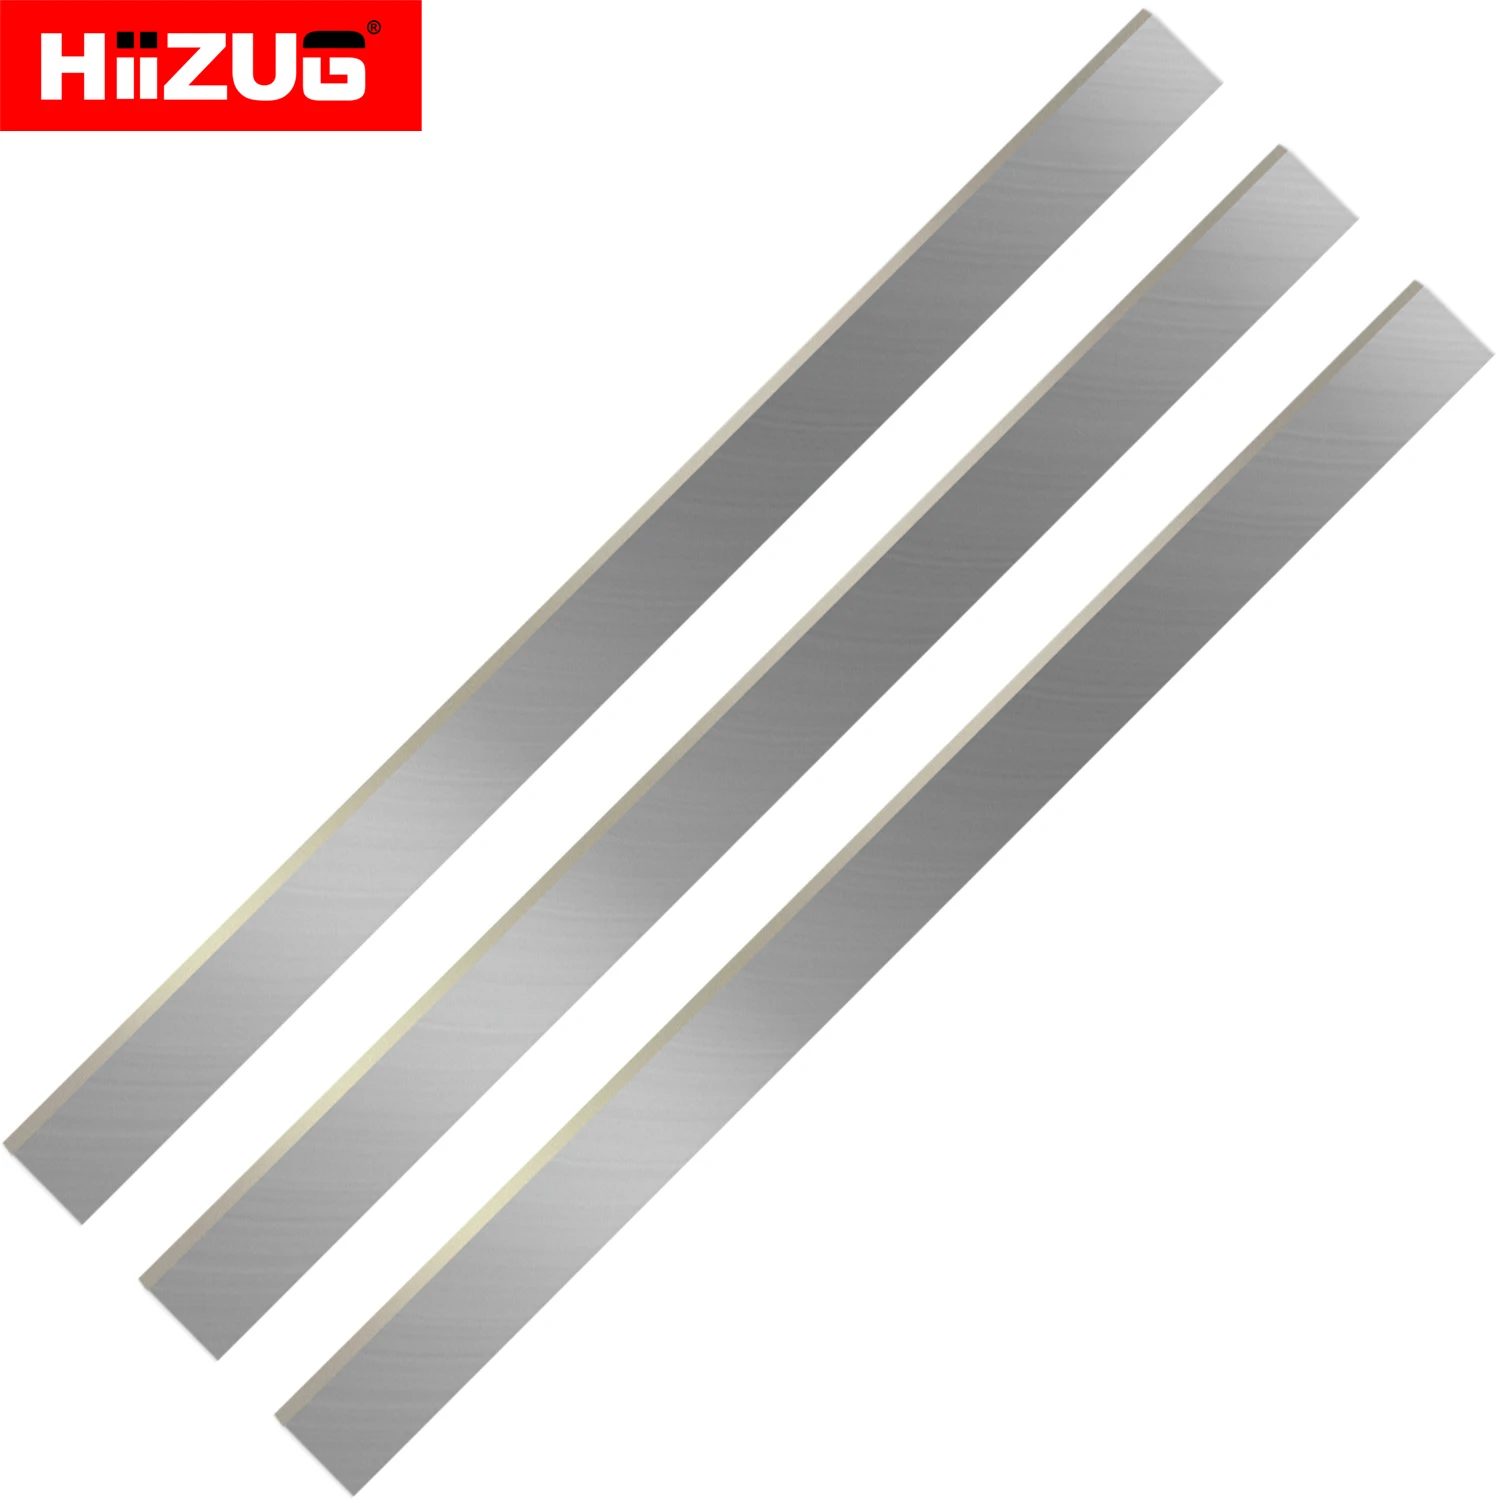 180mm×25mm×3mm planer blades knife 3 pieces for 7 inch cutter head of wood working thicknesser planer jointer machines 483×25×3mm Planer Blades Knife for 19''  Cutter Heads of Electric Thicknesser Planer Jointer  HSS TCT Set of 3 Pieces